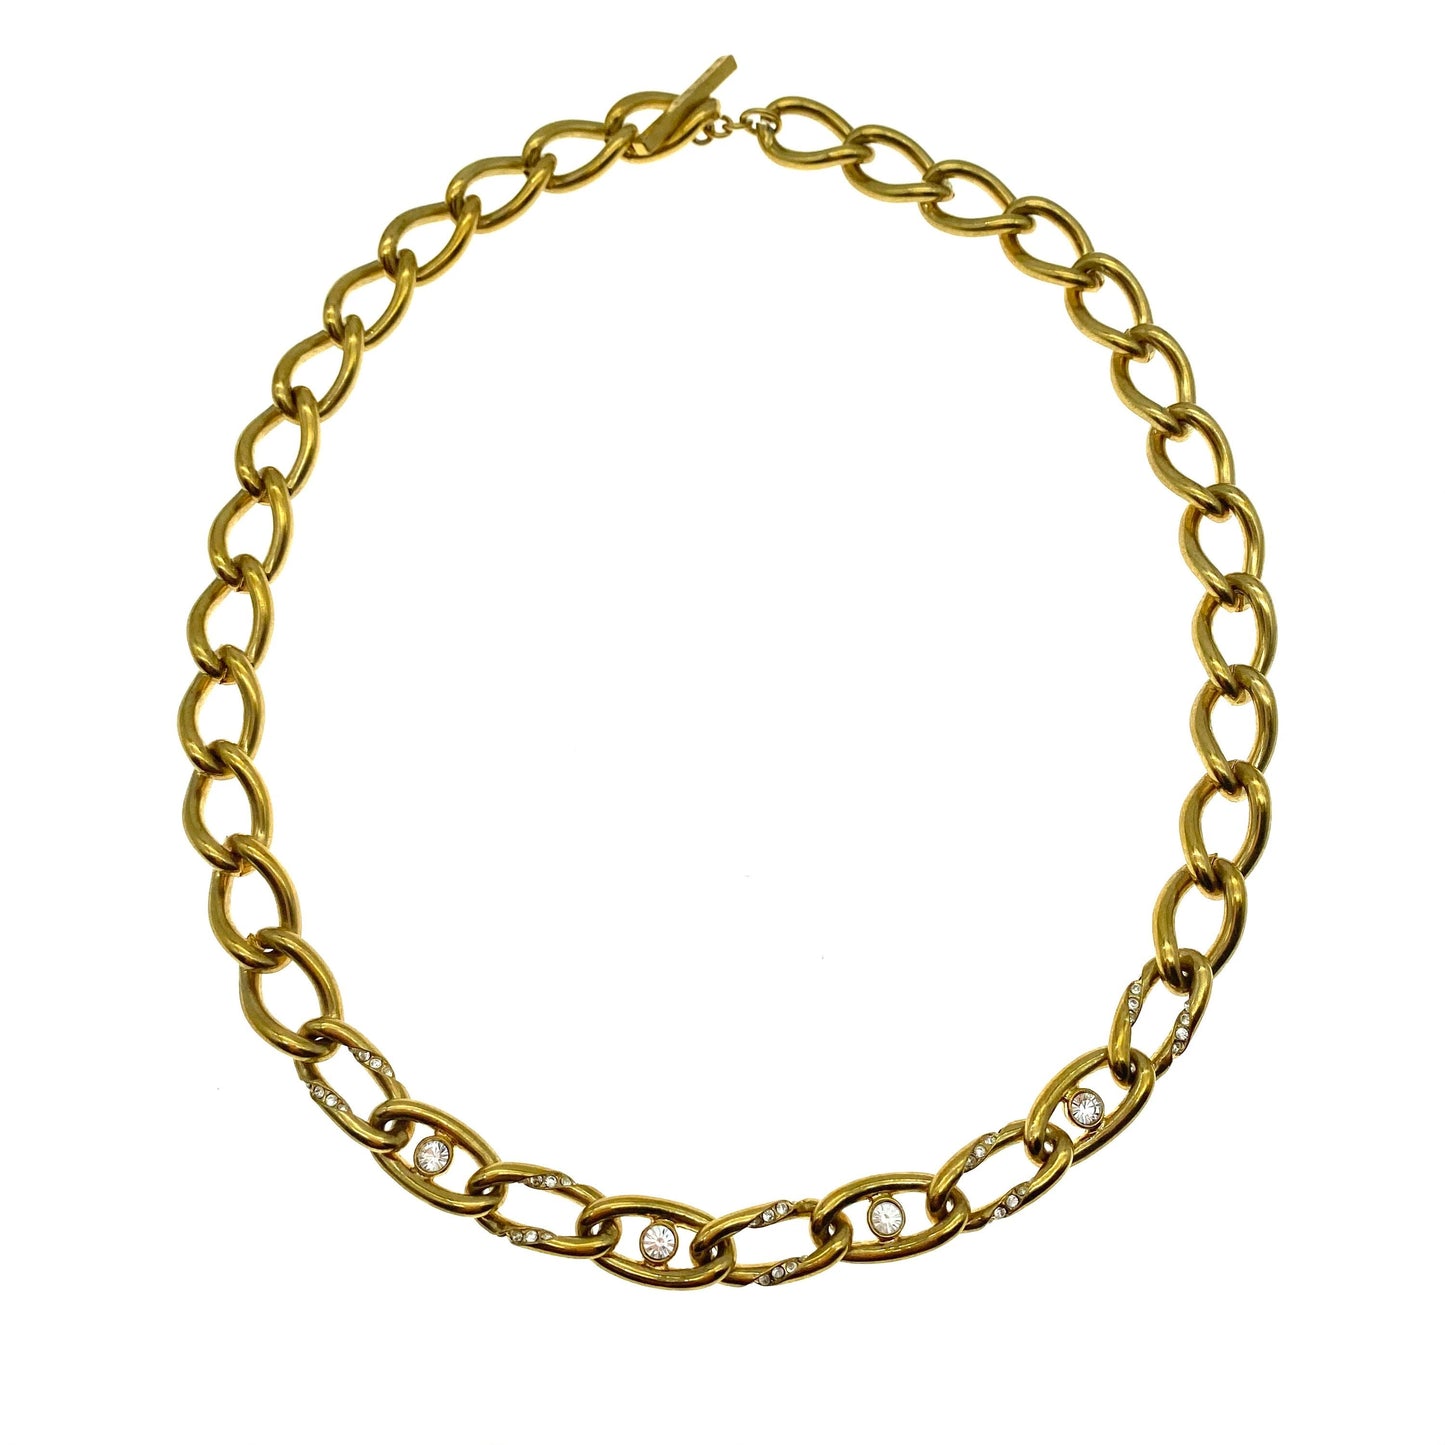 Givenchy Swarovski Crystal Accent Large Curb Chain